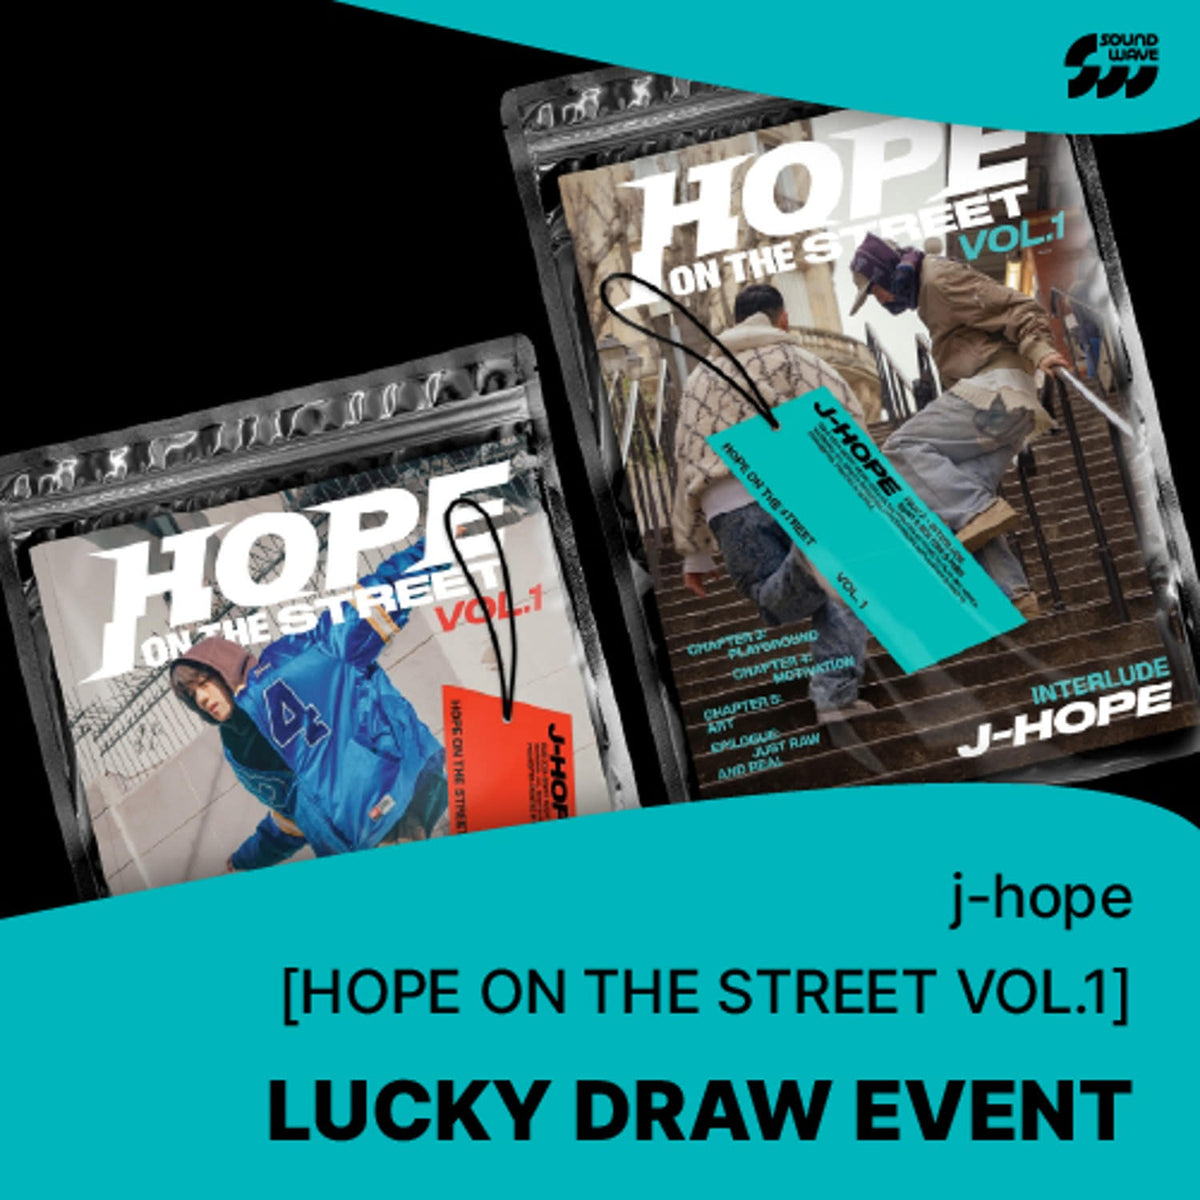 J-HOPE - HOPE ON THE STREET VOL.1 SPECIAL ALBUM SOUNDWAVE LUCKY DRAW EVENT SET - COKODIVE